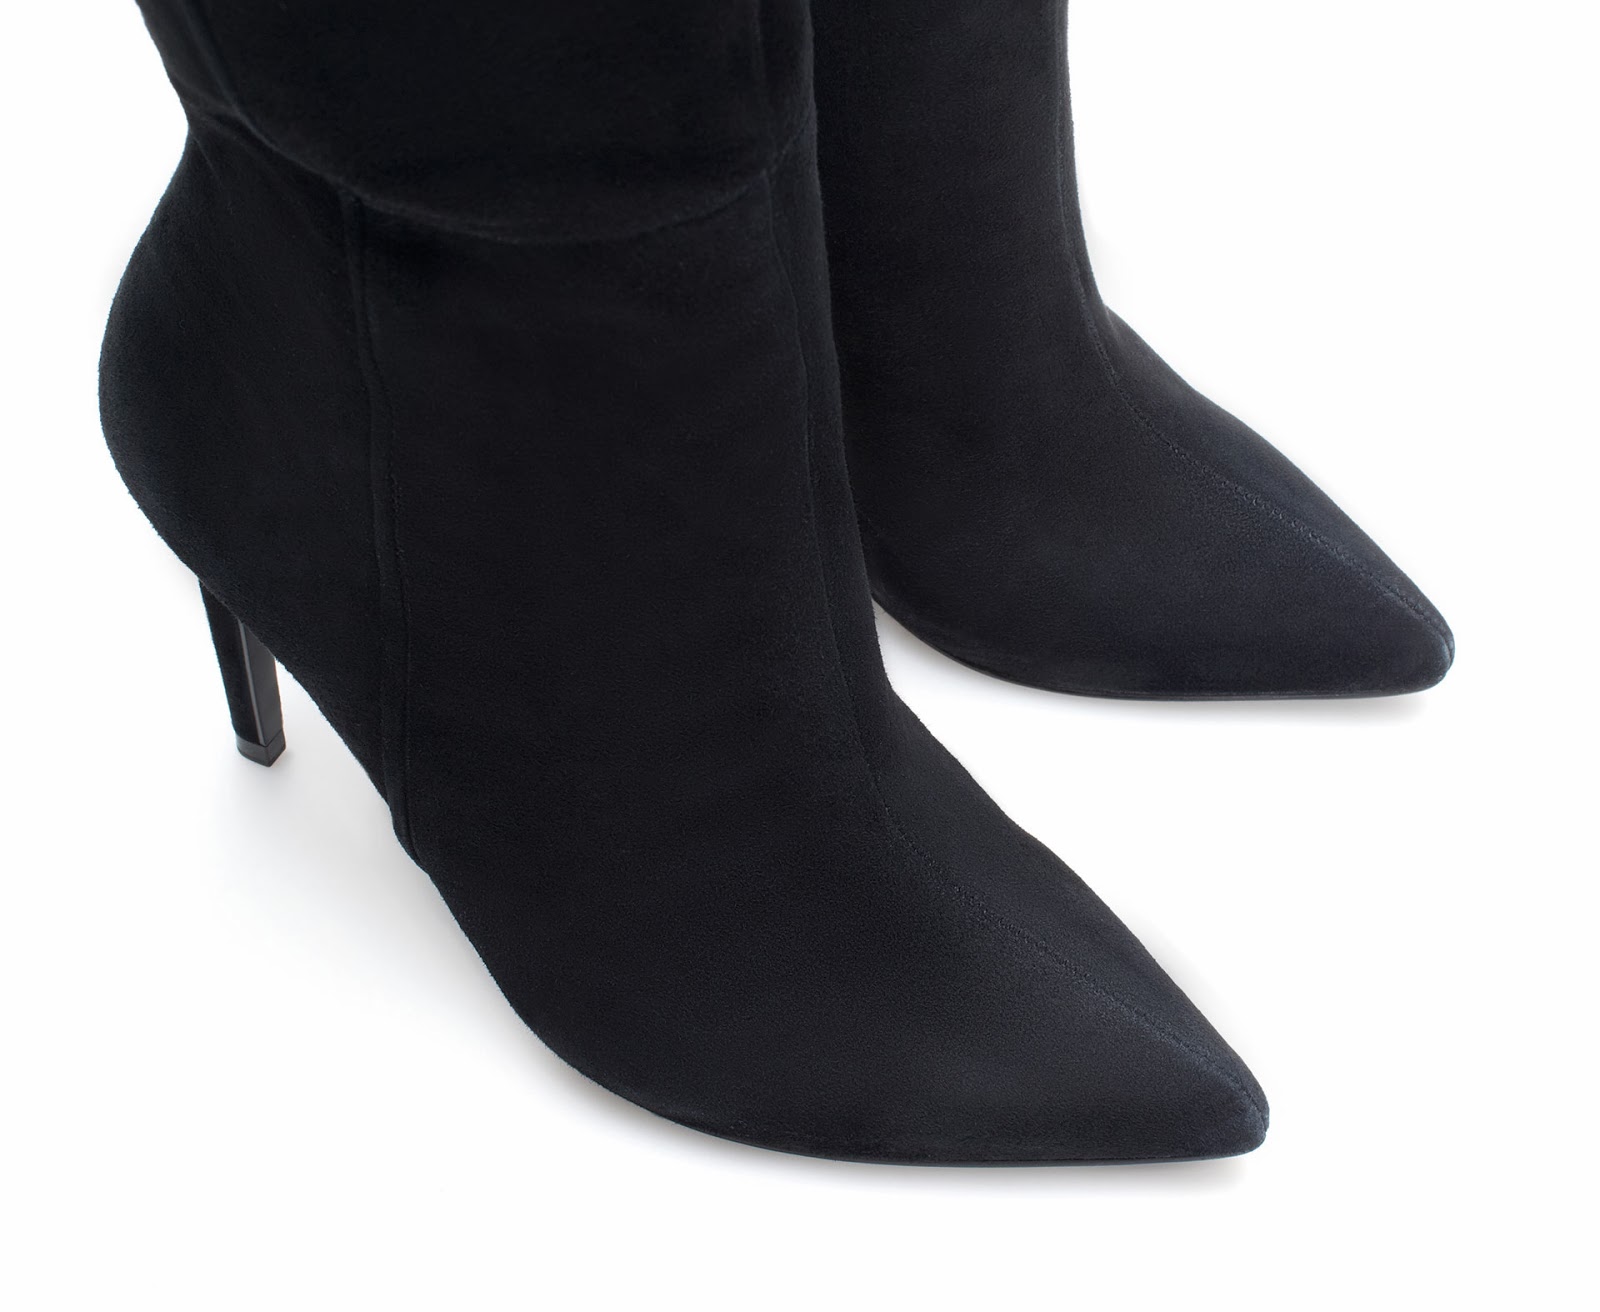 ZARA NEW COLLECTION 2013. 100% LEATHER LONG SUEDE LEATHER BOOTS ...